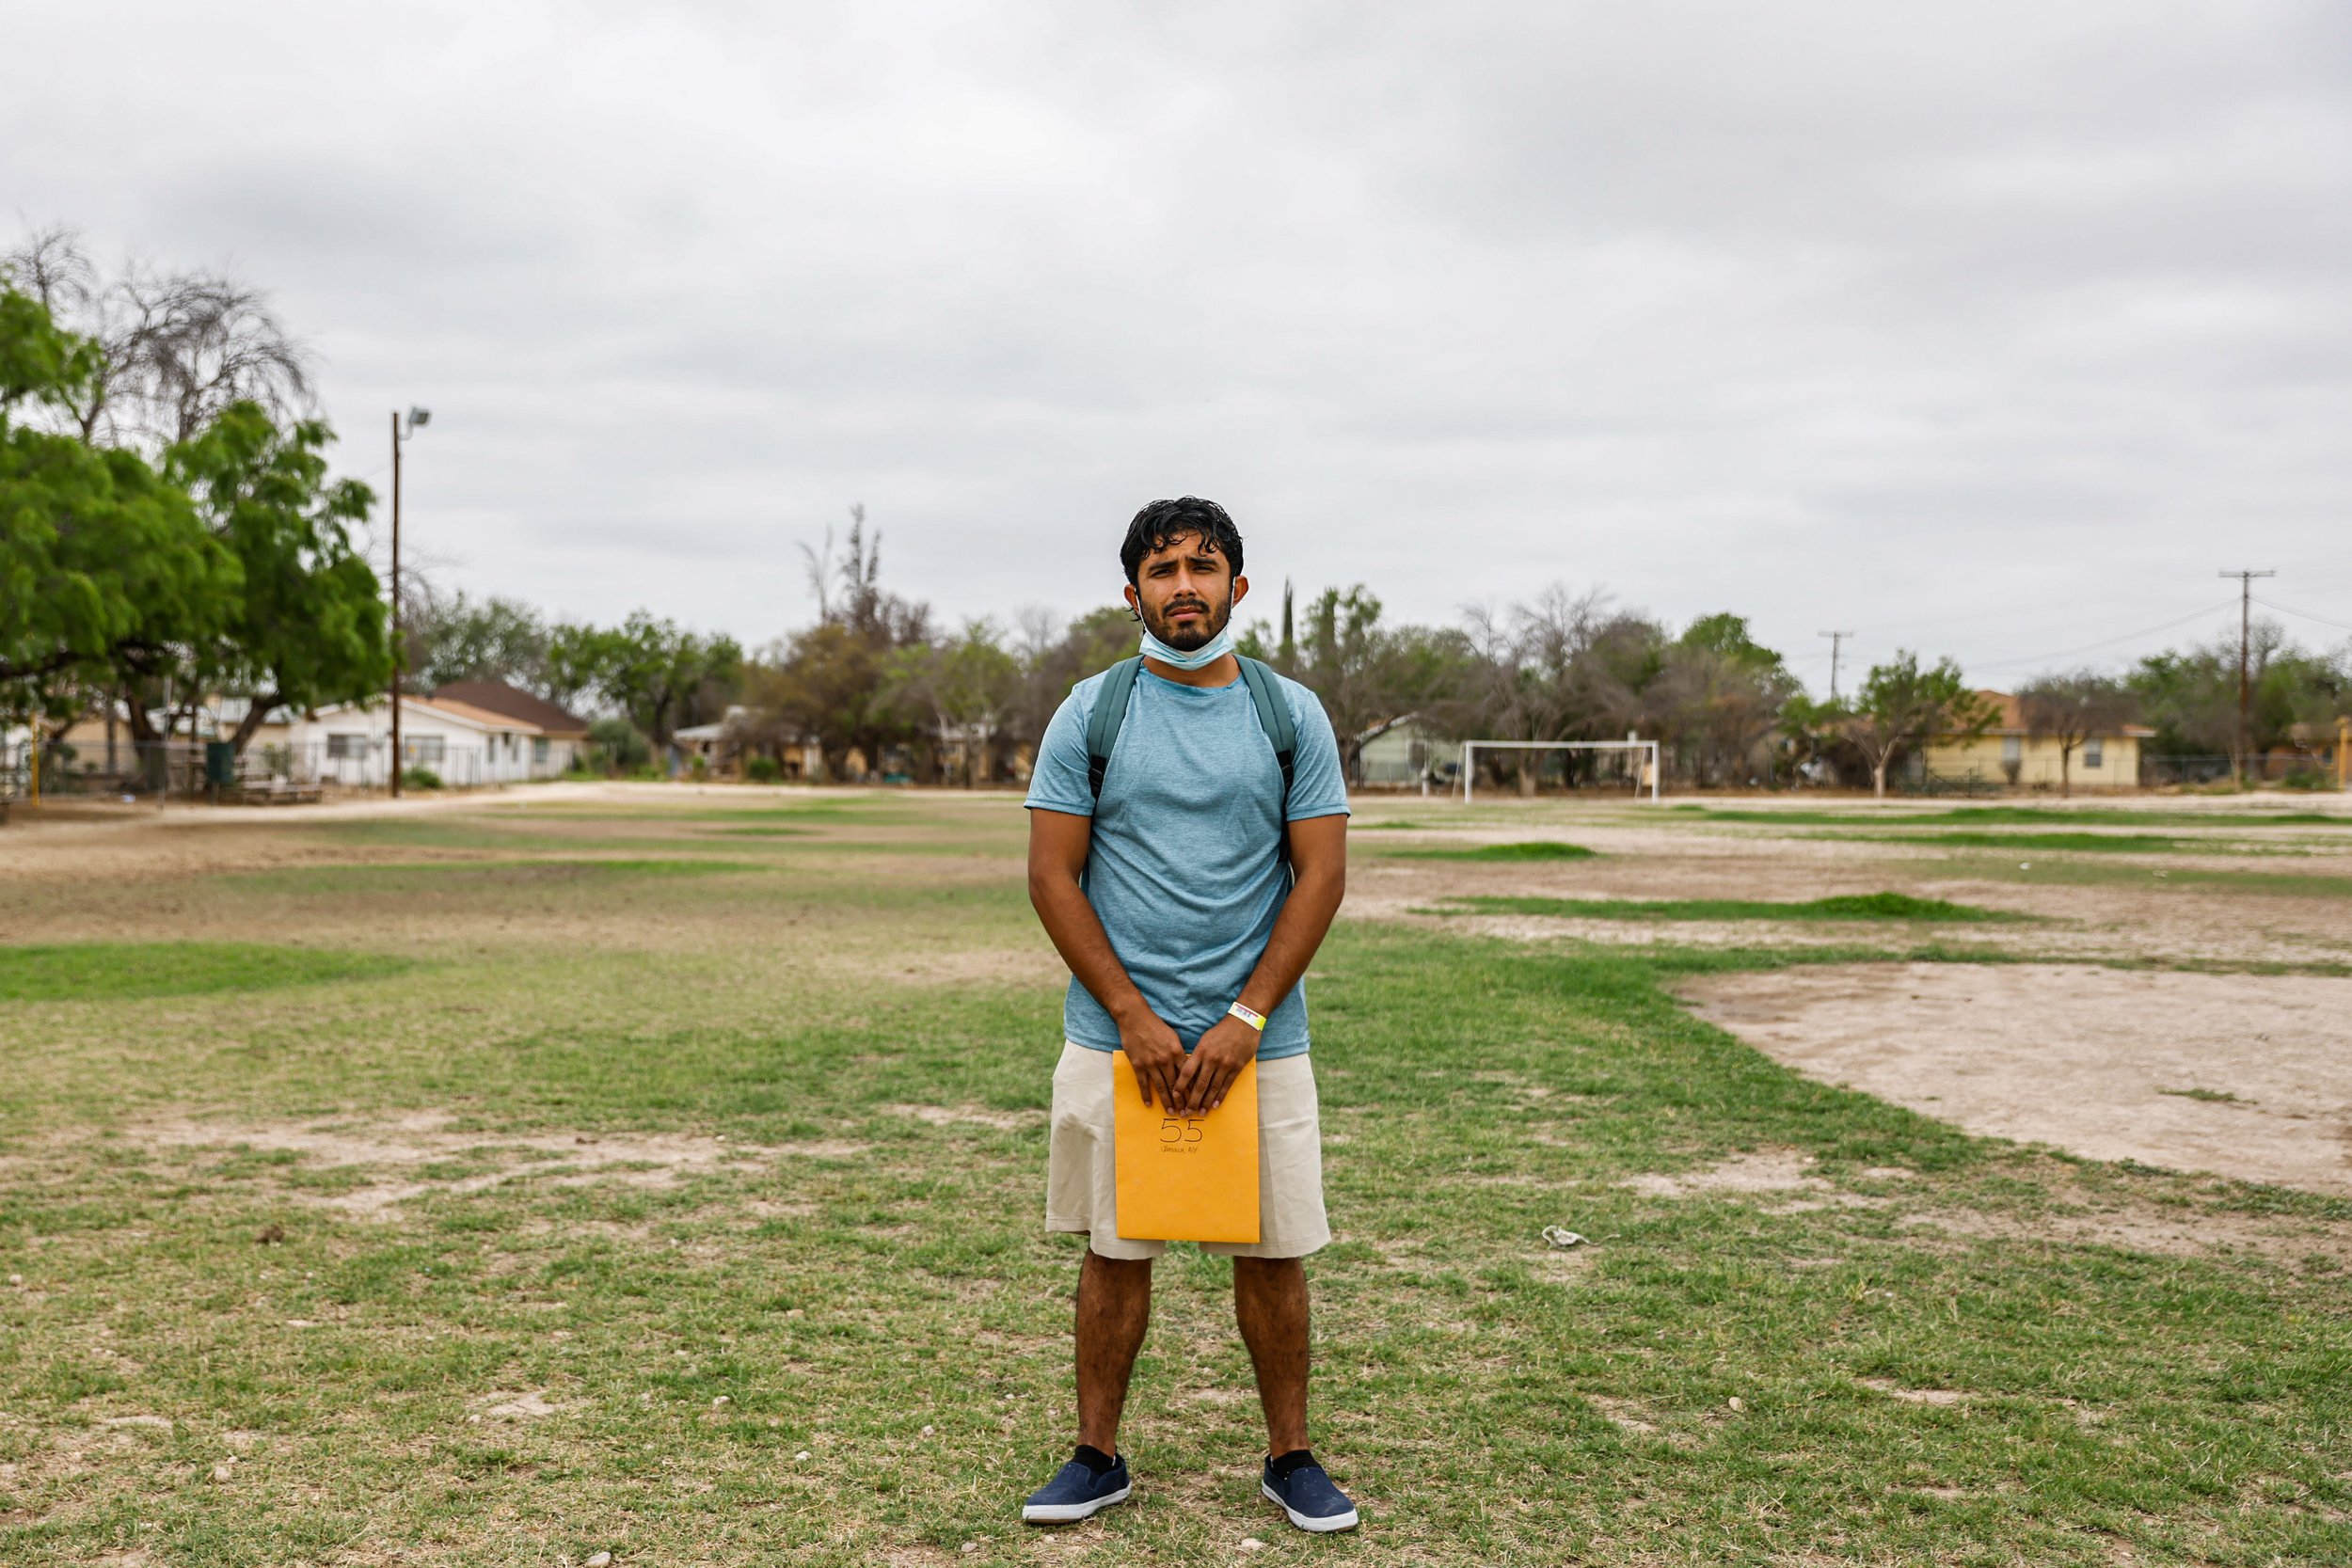  Victor Rodriguez, 26, poses for a portrait in Del Rio, Texas on Wednesday, April 20, 2022. Rodriguez, originally from Venezuela, started to travel by foot from his home country to the United States on March 13, 2022, making a trip that lasted 36 day